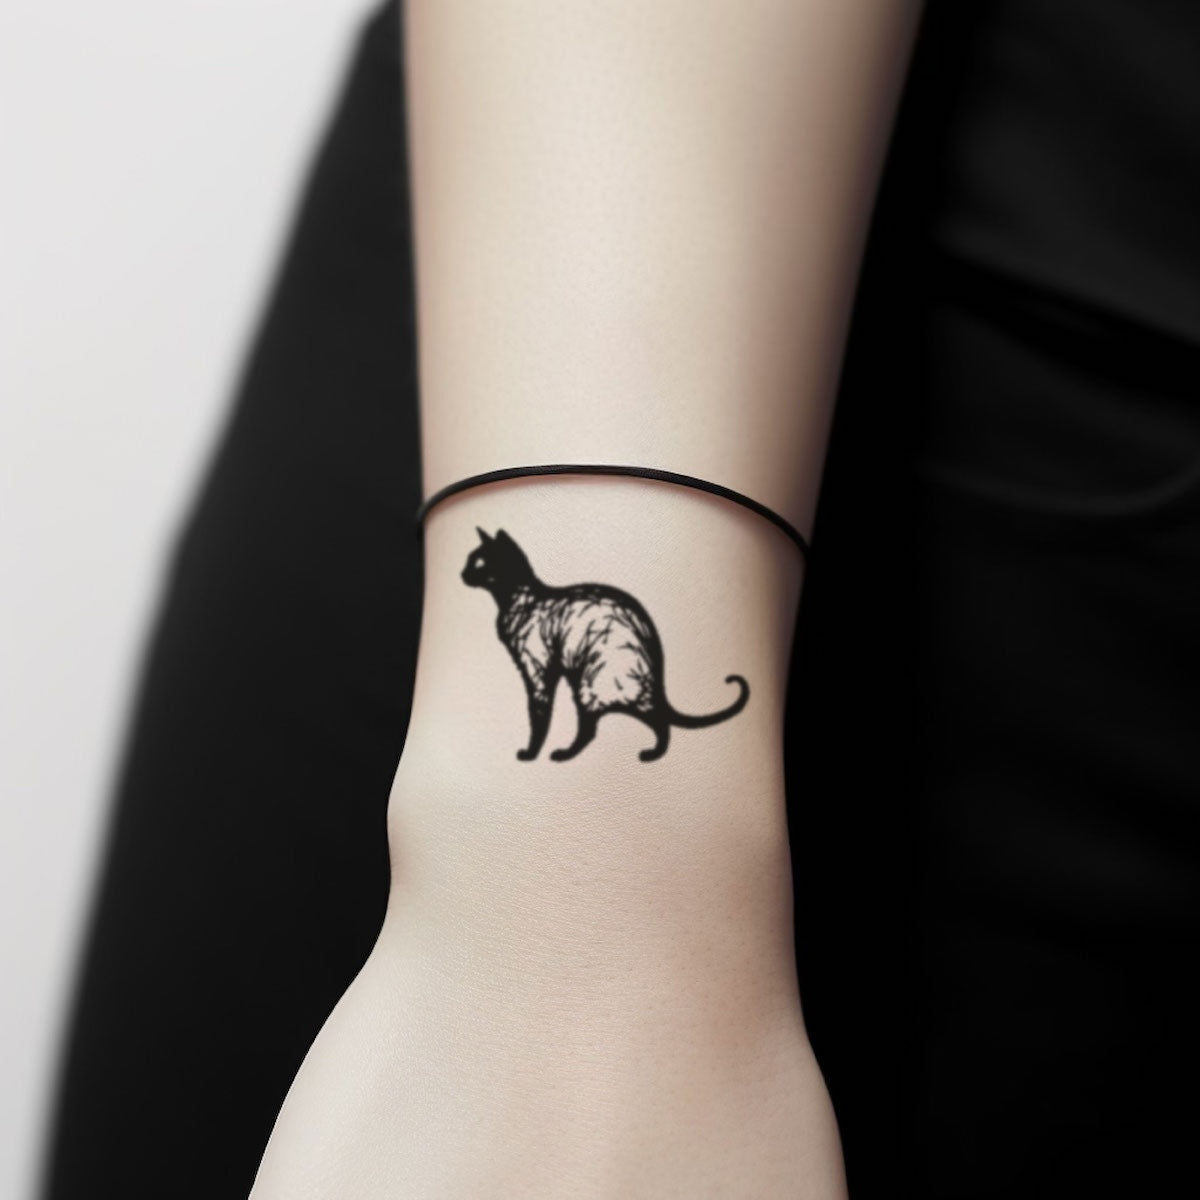 best cool simple small black sketchy cat outline minimalist animal fake realistic temporary tattoo sticker design idea for men and women on wrist lower arm forearm hand